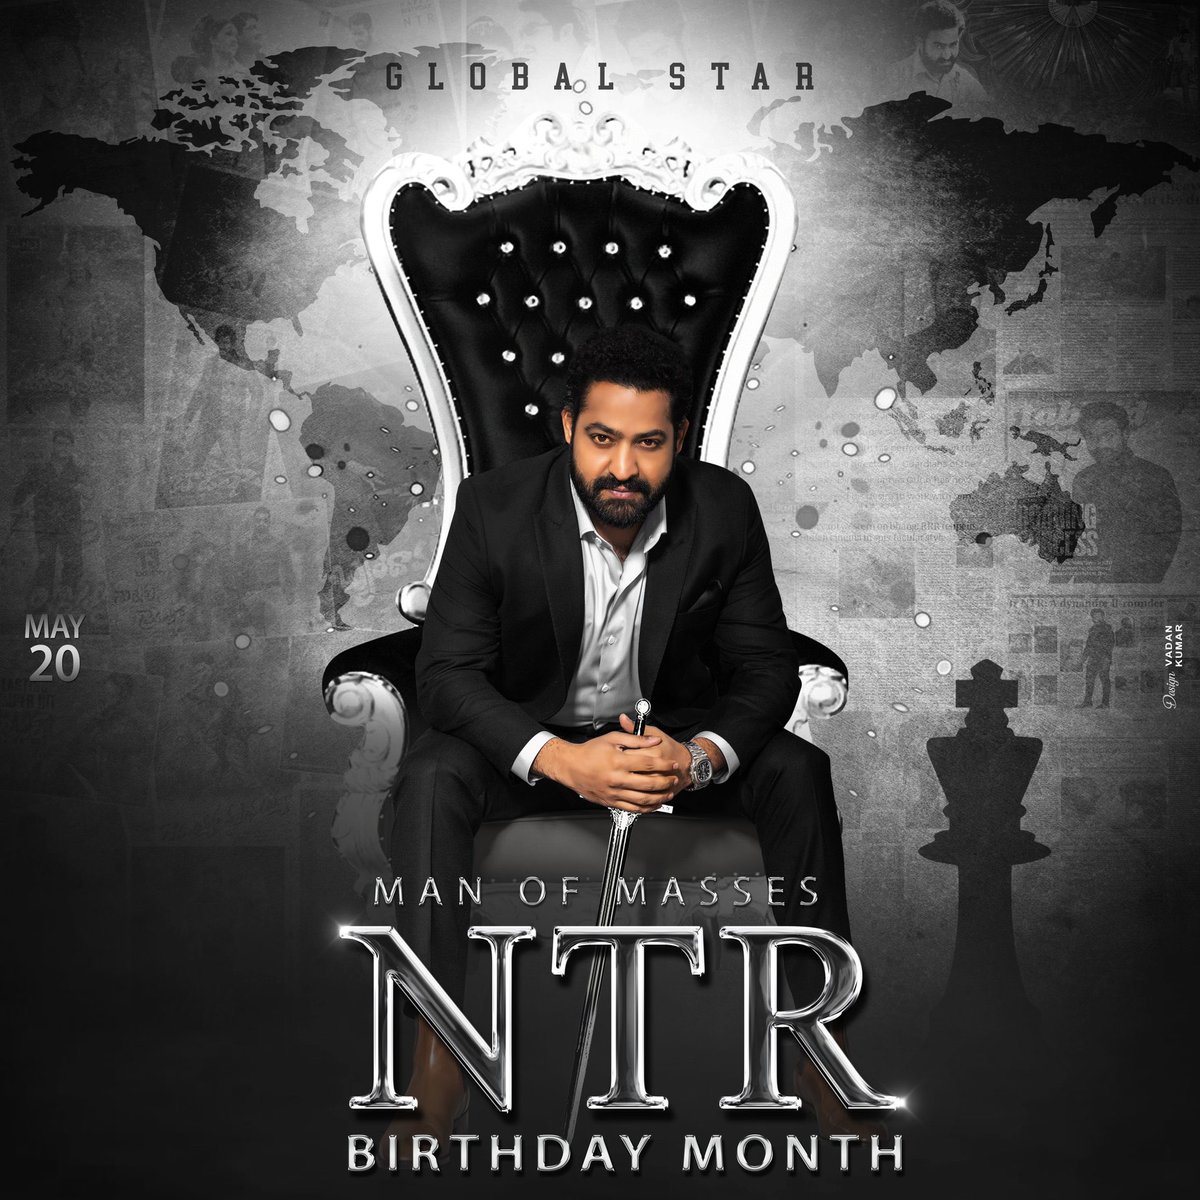 And it's MAY Month 😍 GET READY TO CLEBRATE BIRTHDAY OF THE BIGGEST MASS HERO IN INDIA #MAY20 @tarak9999 #NTRBirthdayMonth #ManOfMassesNTR #NTR #JrNTR